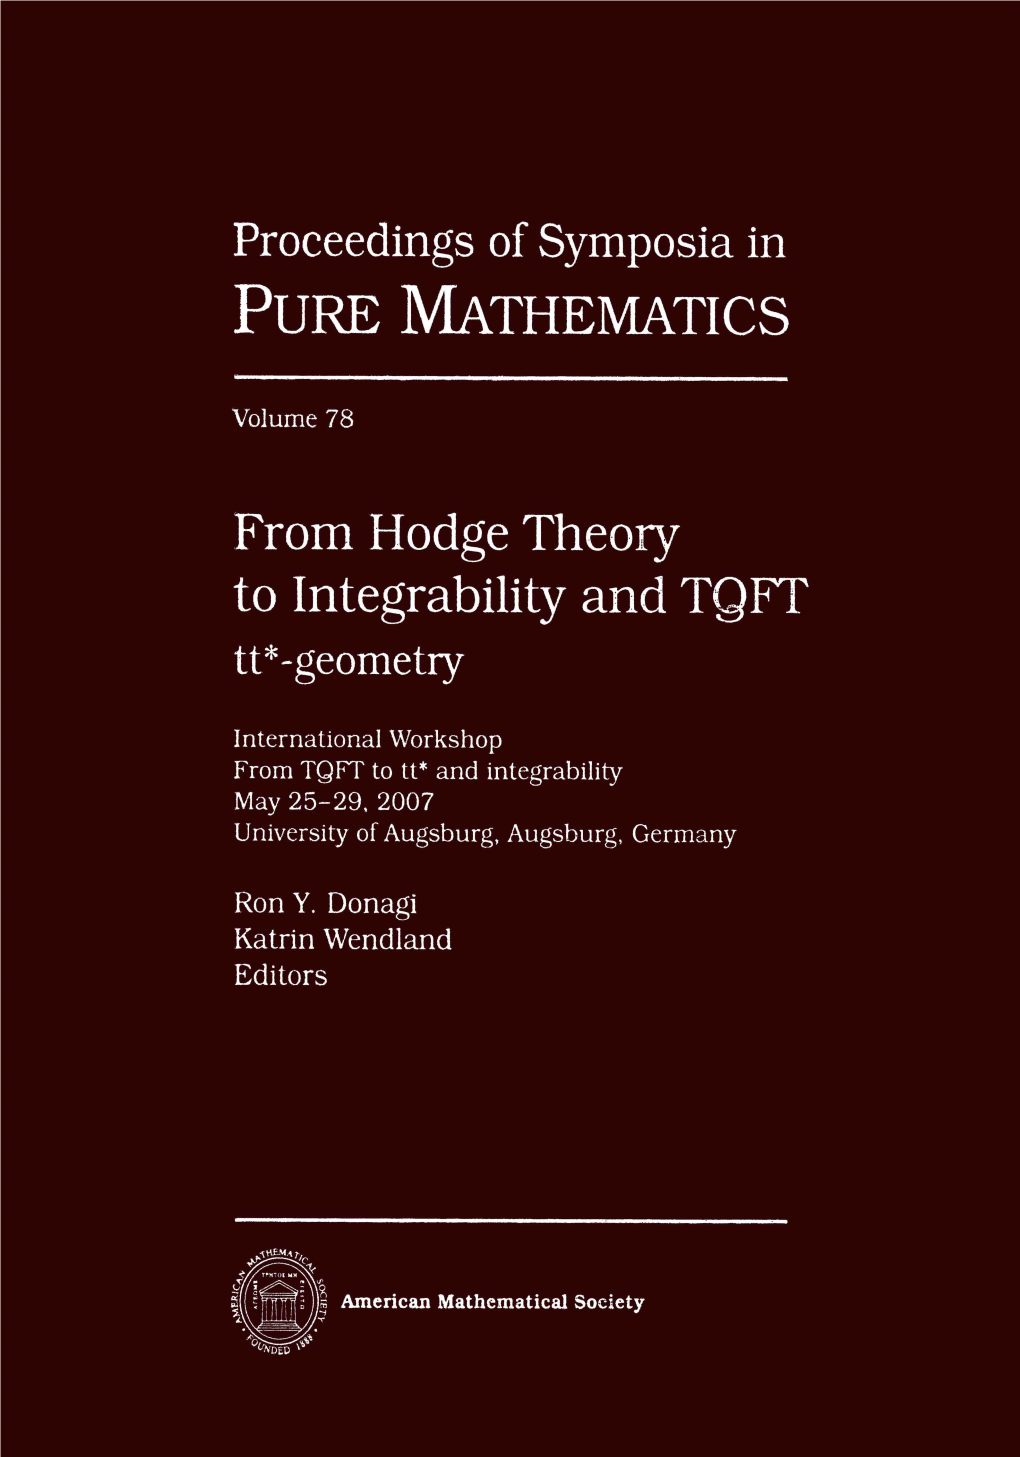 From Hodge Theory to Integrability and TQFT Tt* -Geometry